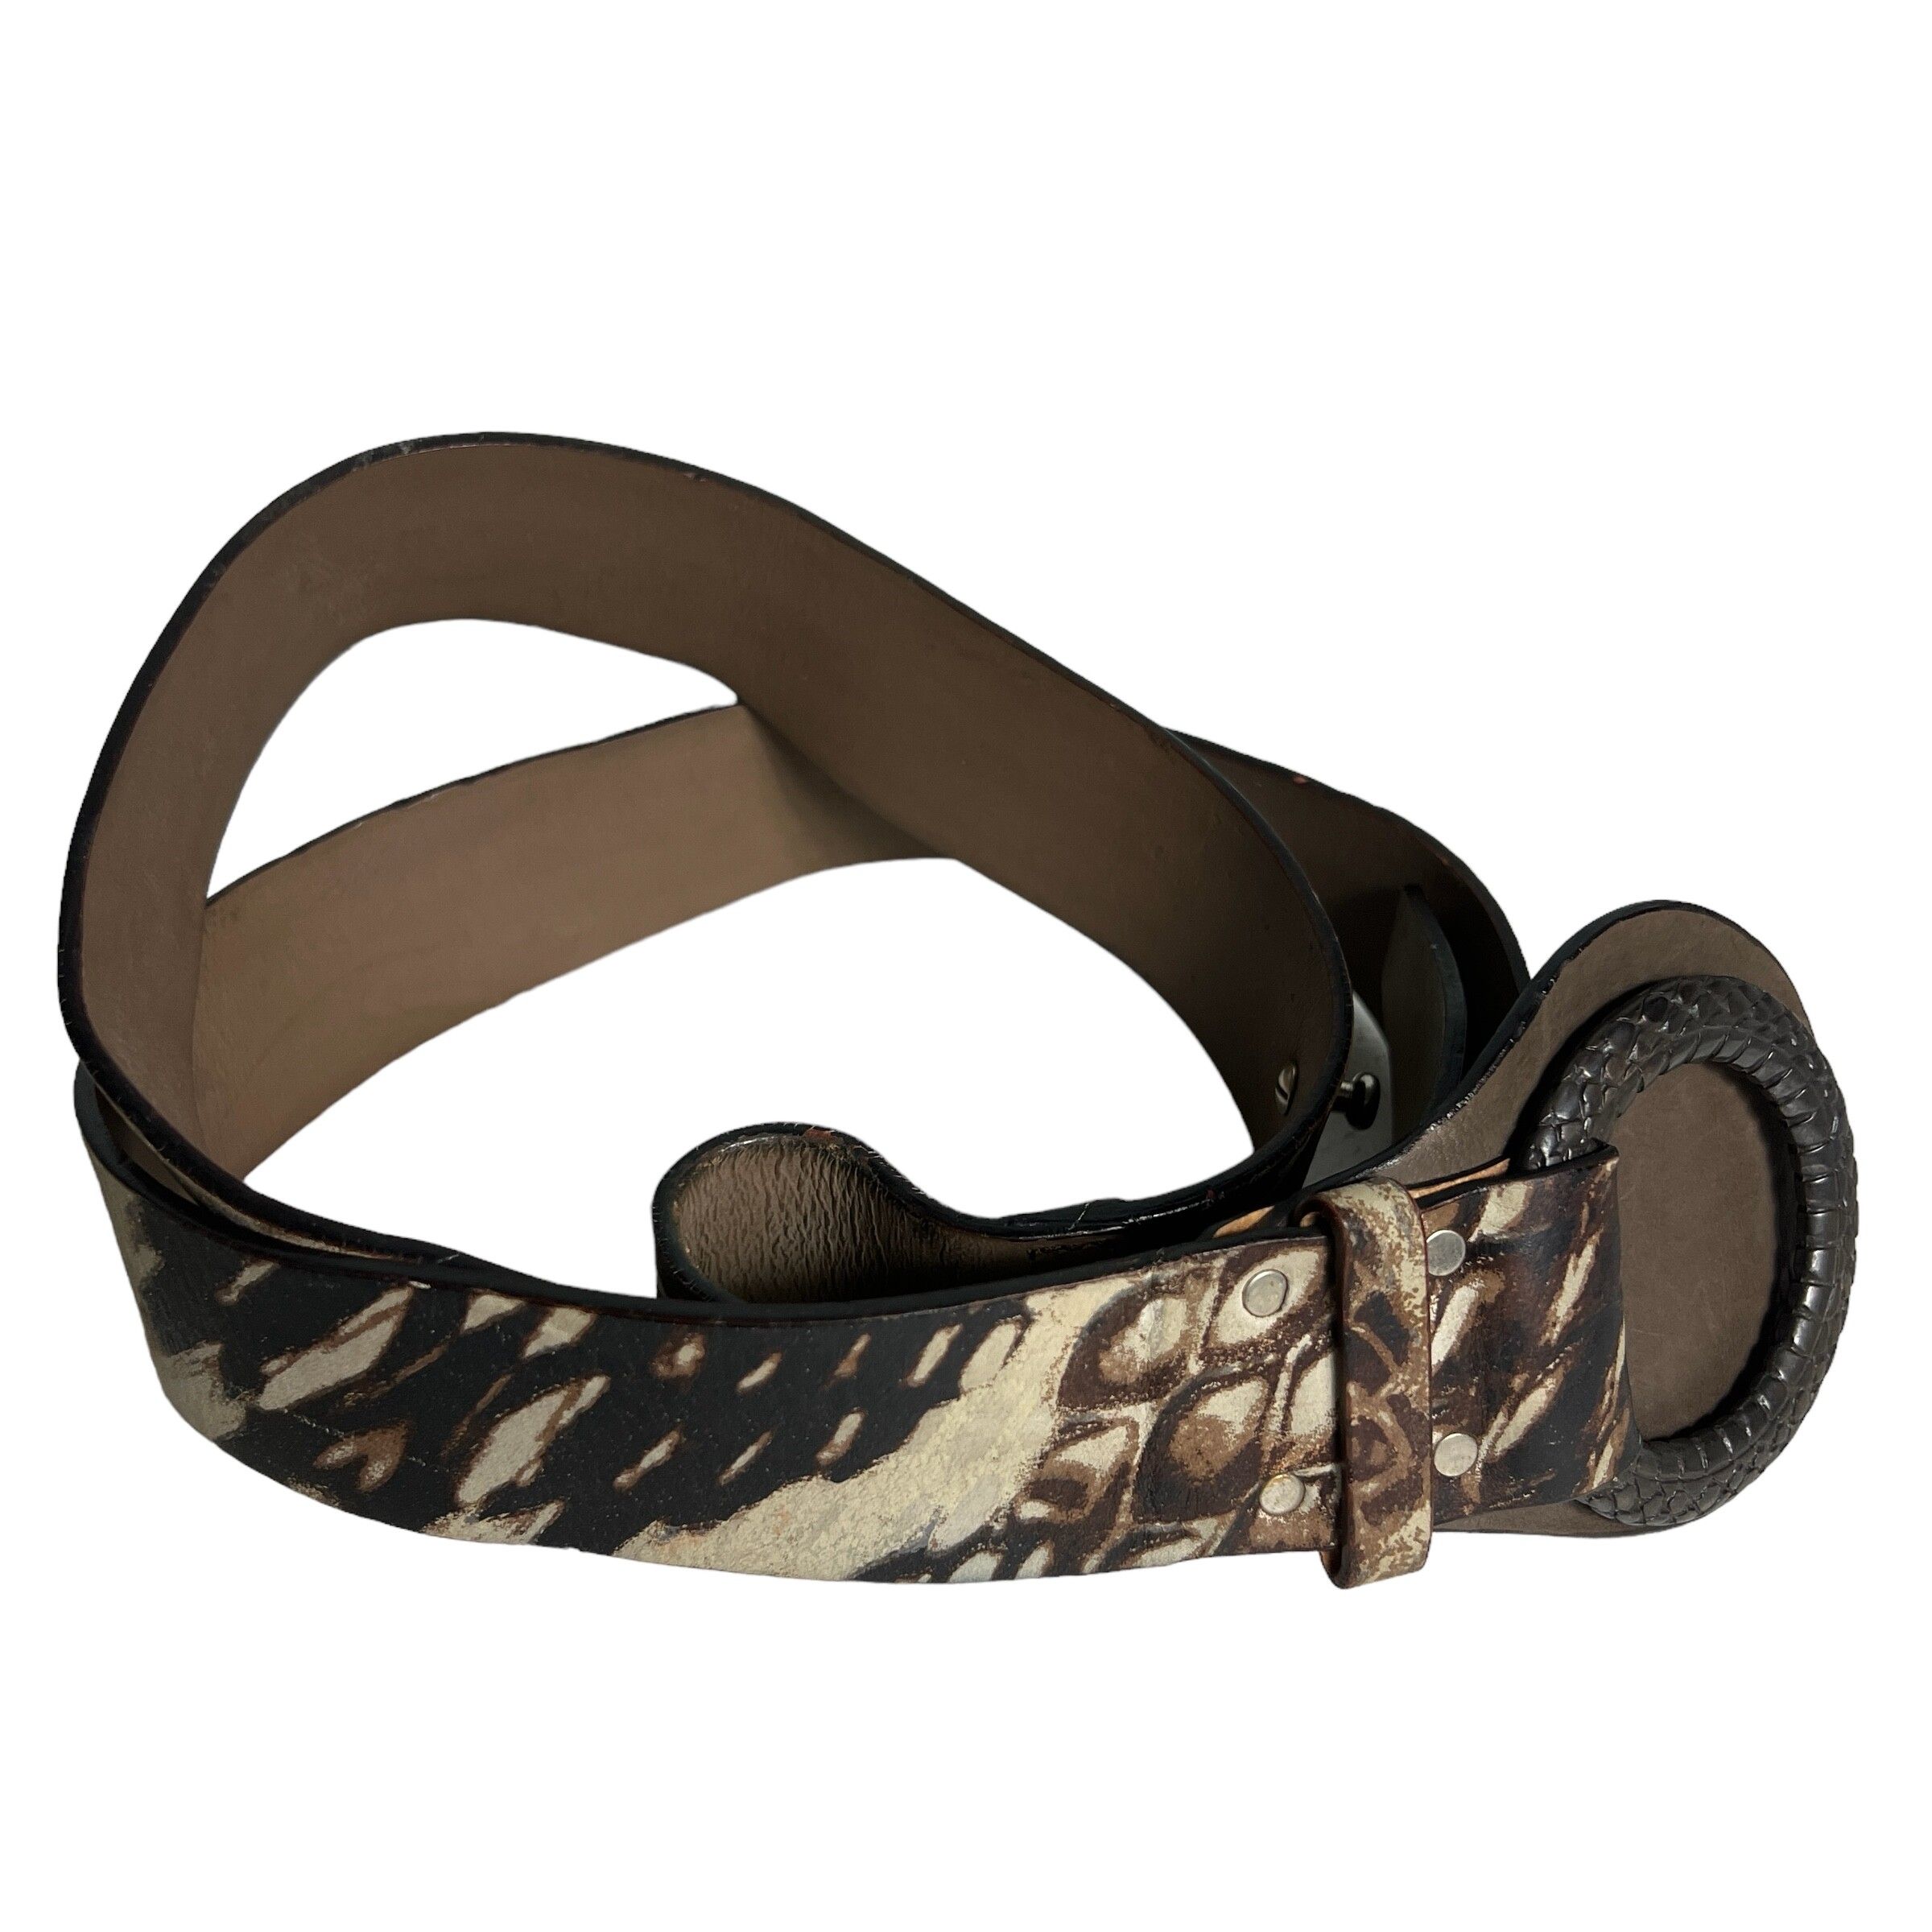 Just Cavalli Roberto Cavalli Freedom Leather Belt Made in Italy | Grailed